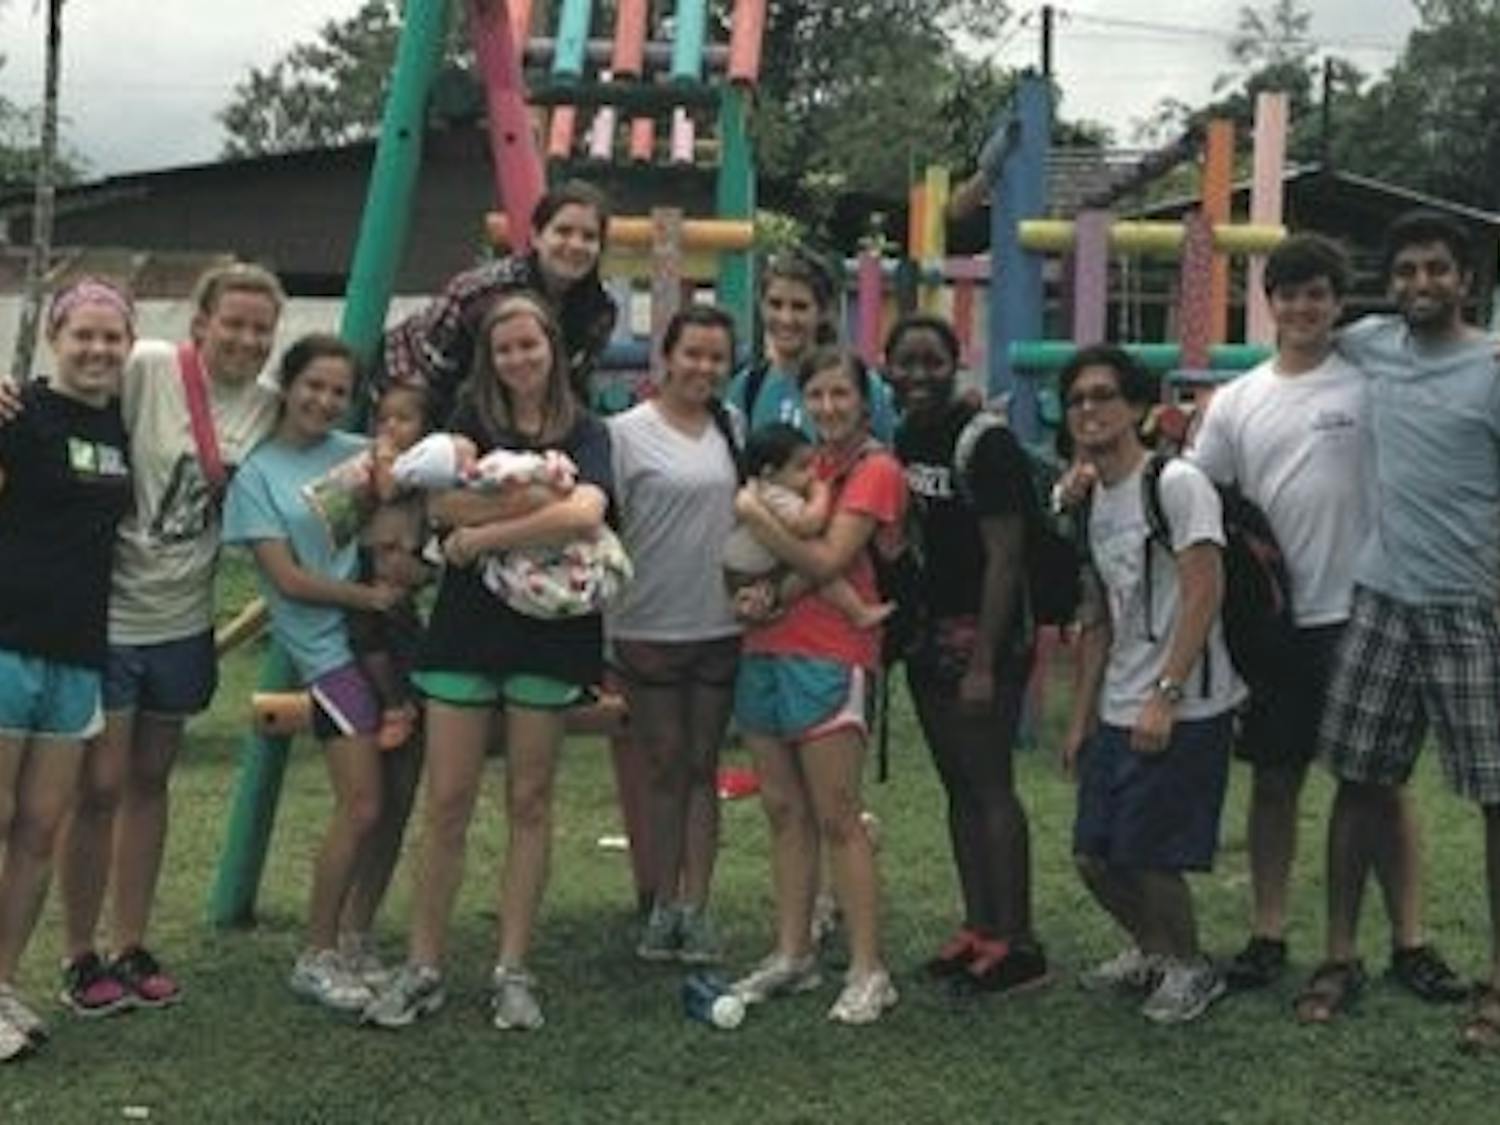 Aeikens and the ASB group hang out on the playground with children at the orphanage in Nicarauga. (Courtesy of Brianne Aeikens)